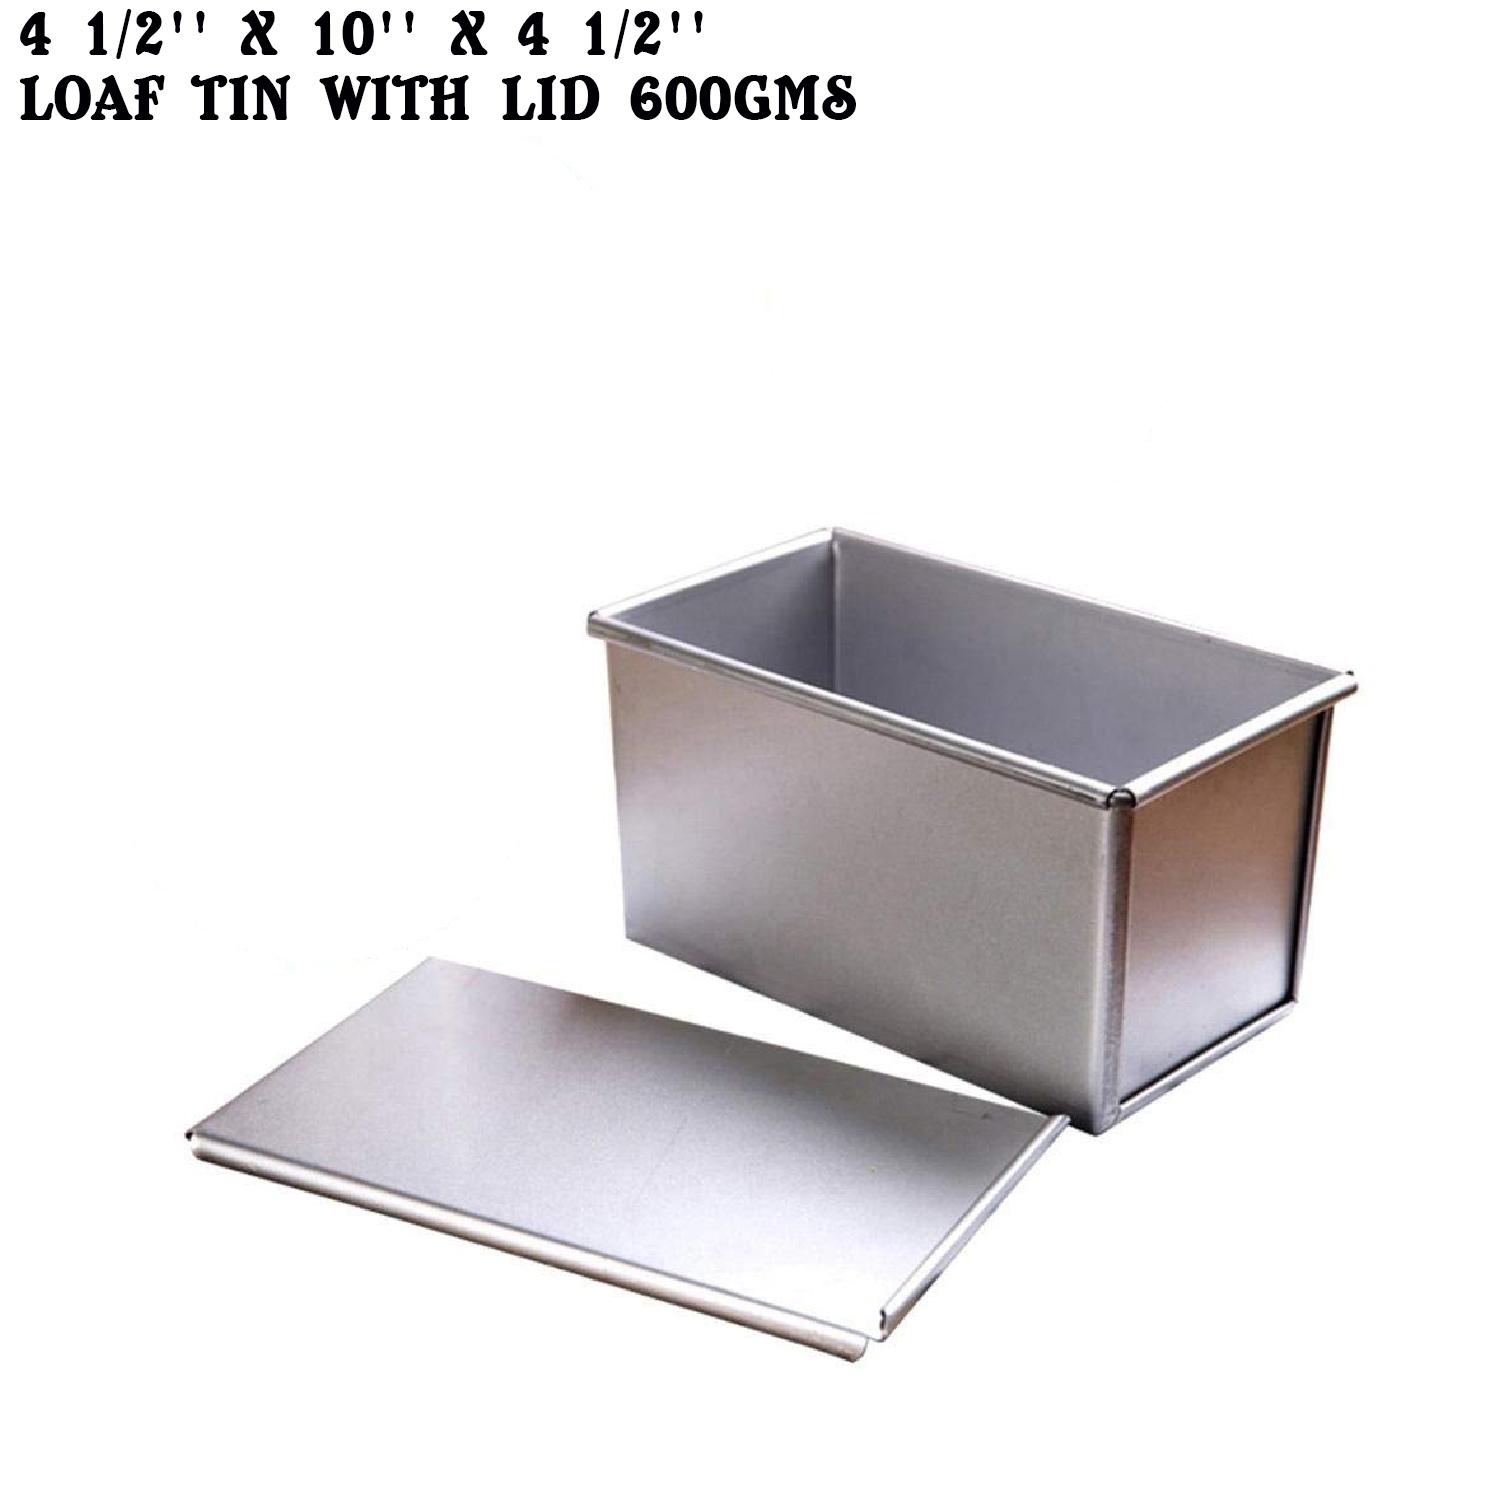 4 1/2'' X 10'' X 4 1/2'' LOAF TIN WITH LID 600GMS